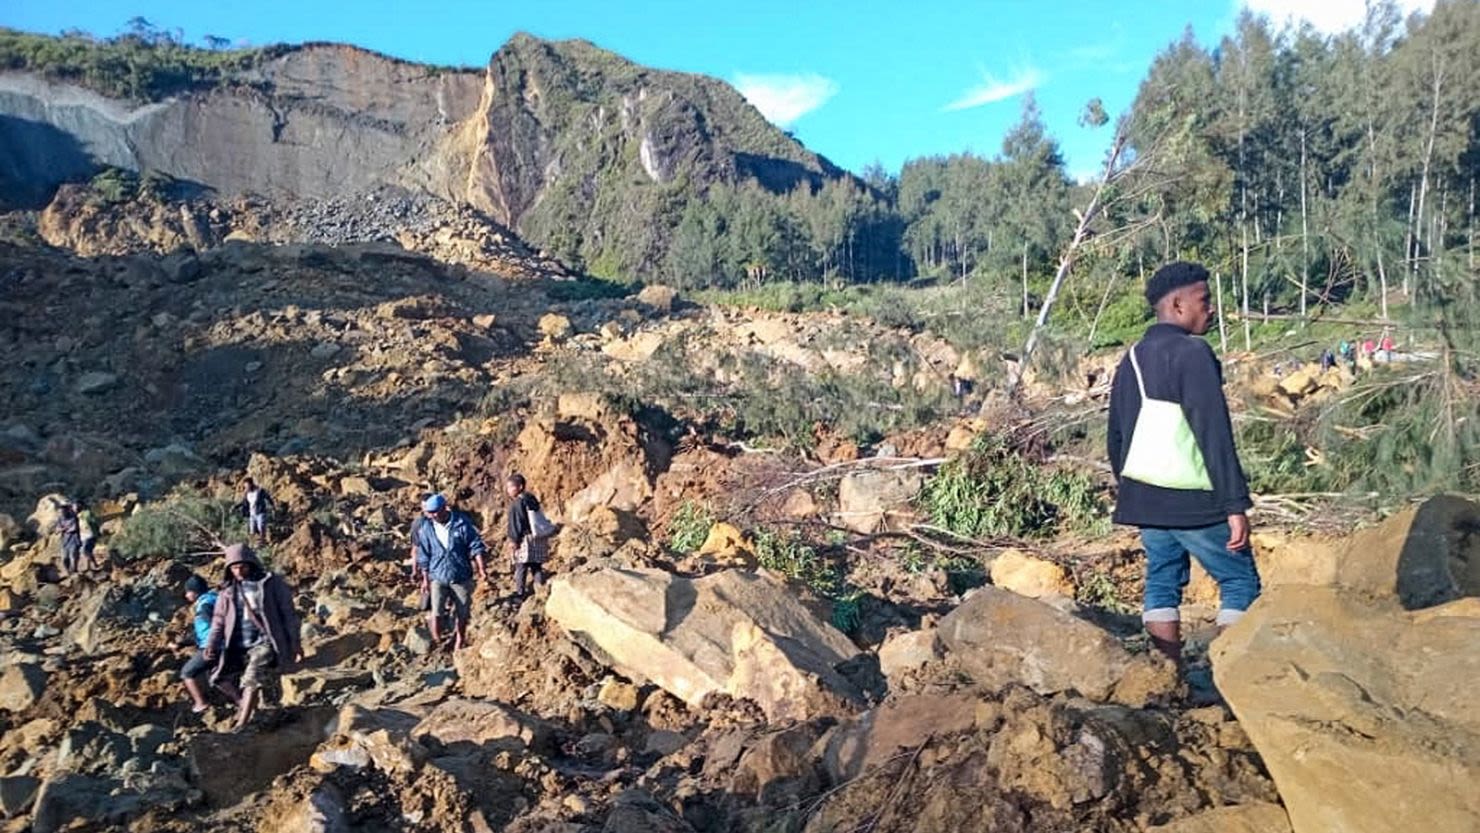 More than 100 feared dead in remote region of Papua New Guinea hit by deadly landslide